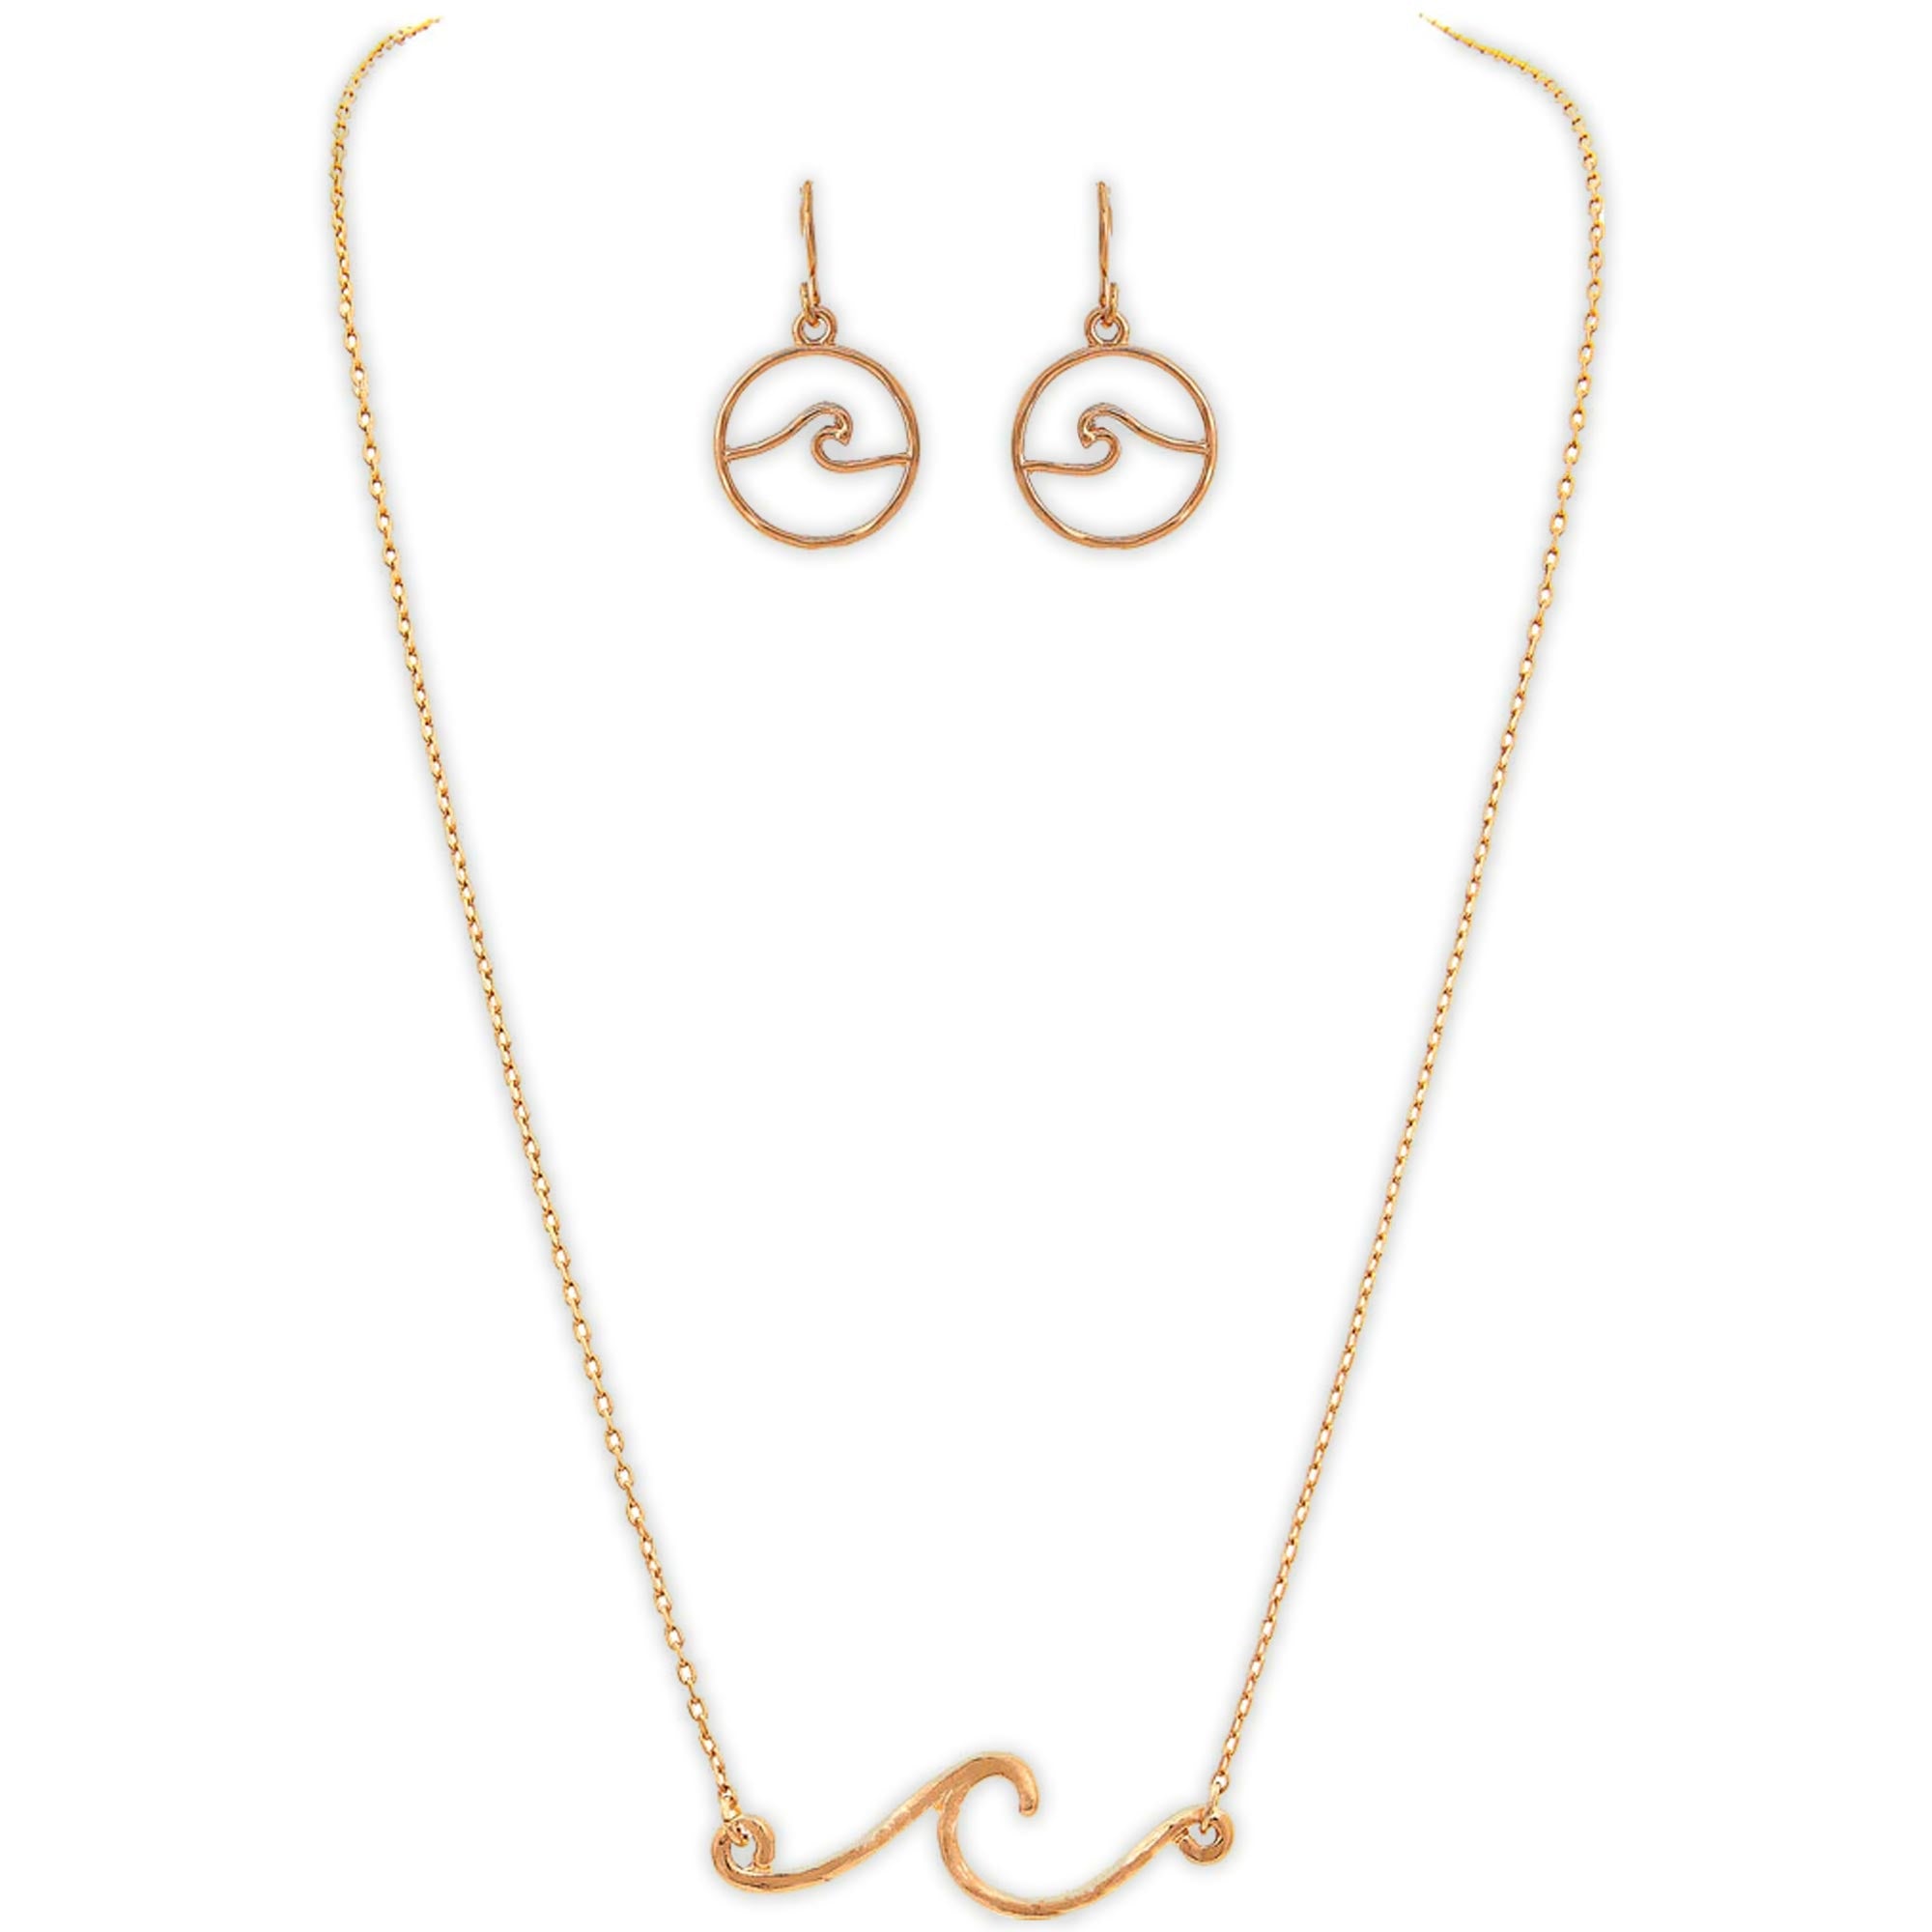 Gold Rip Curl Waves Necklace Set